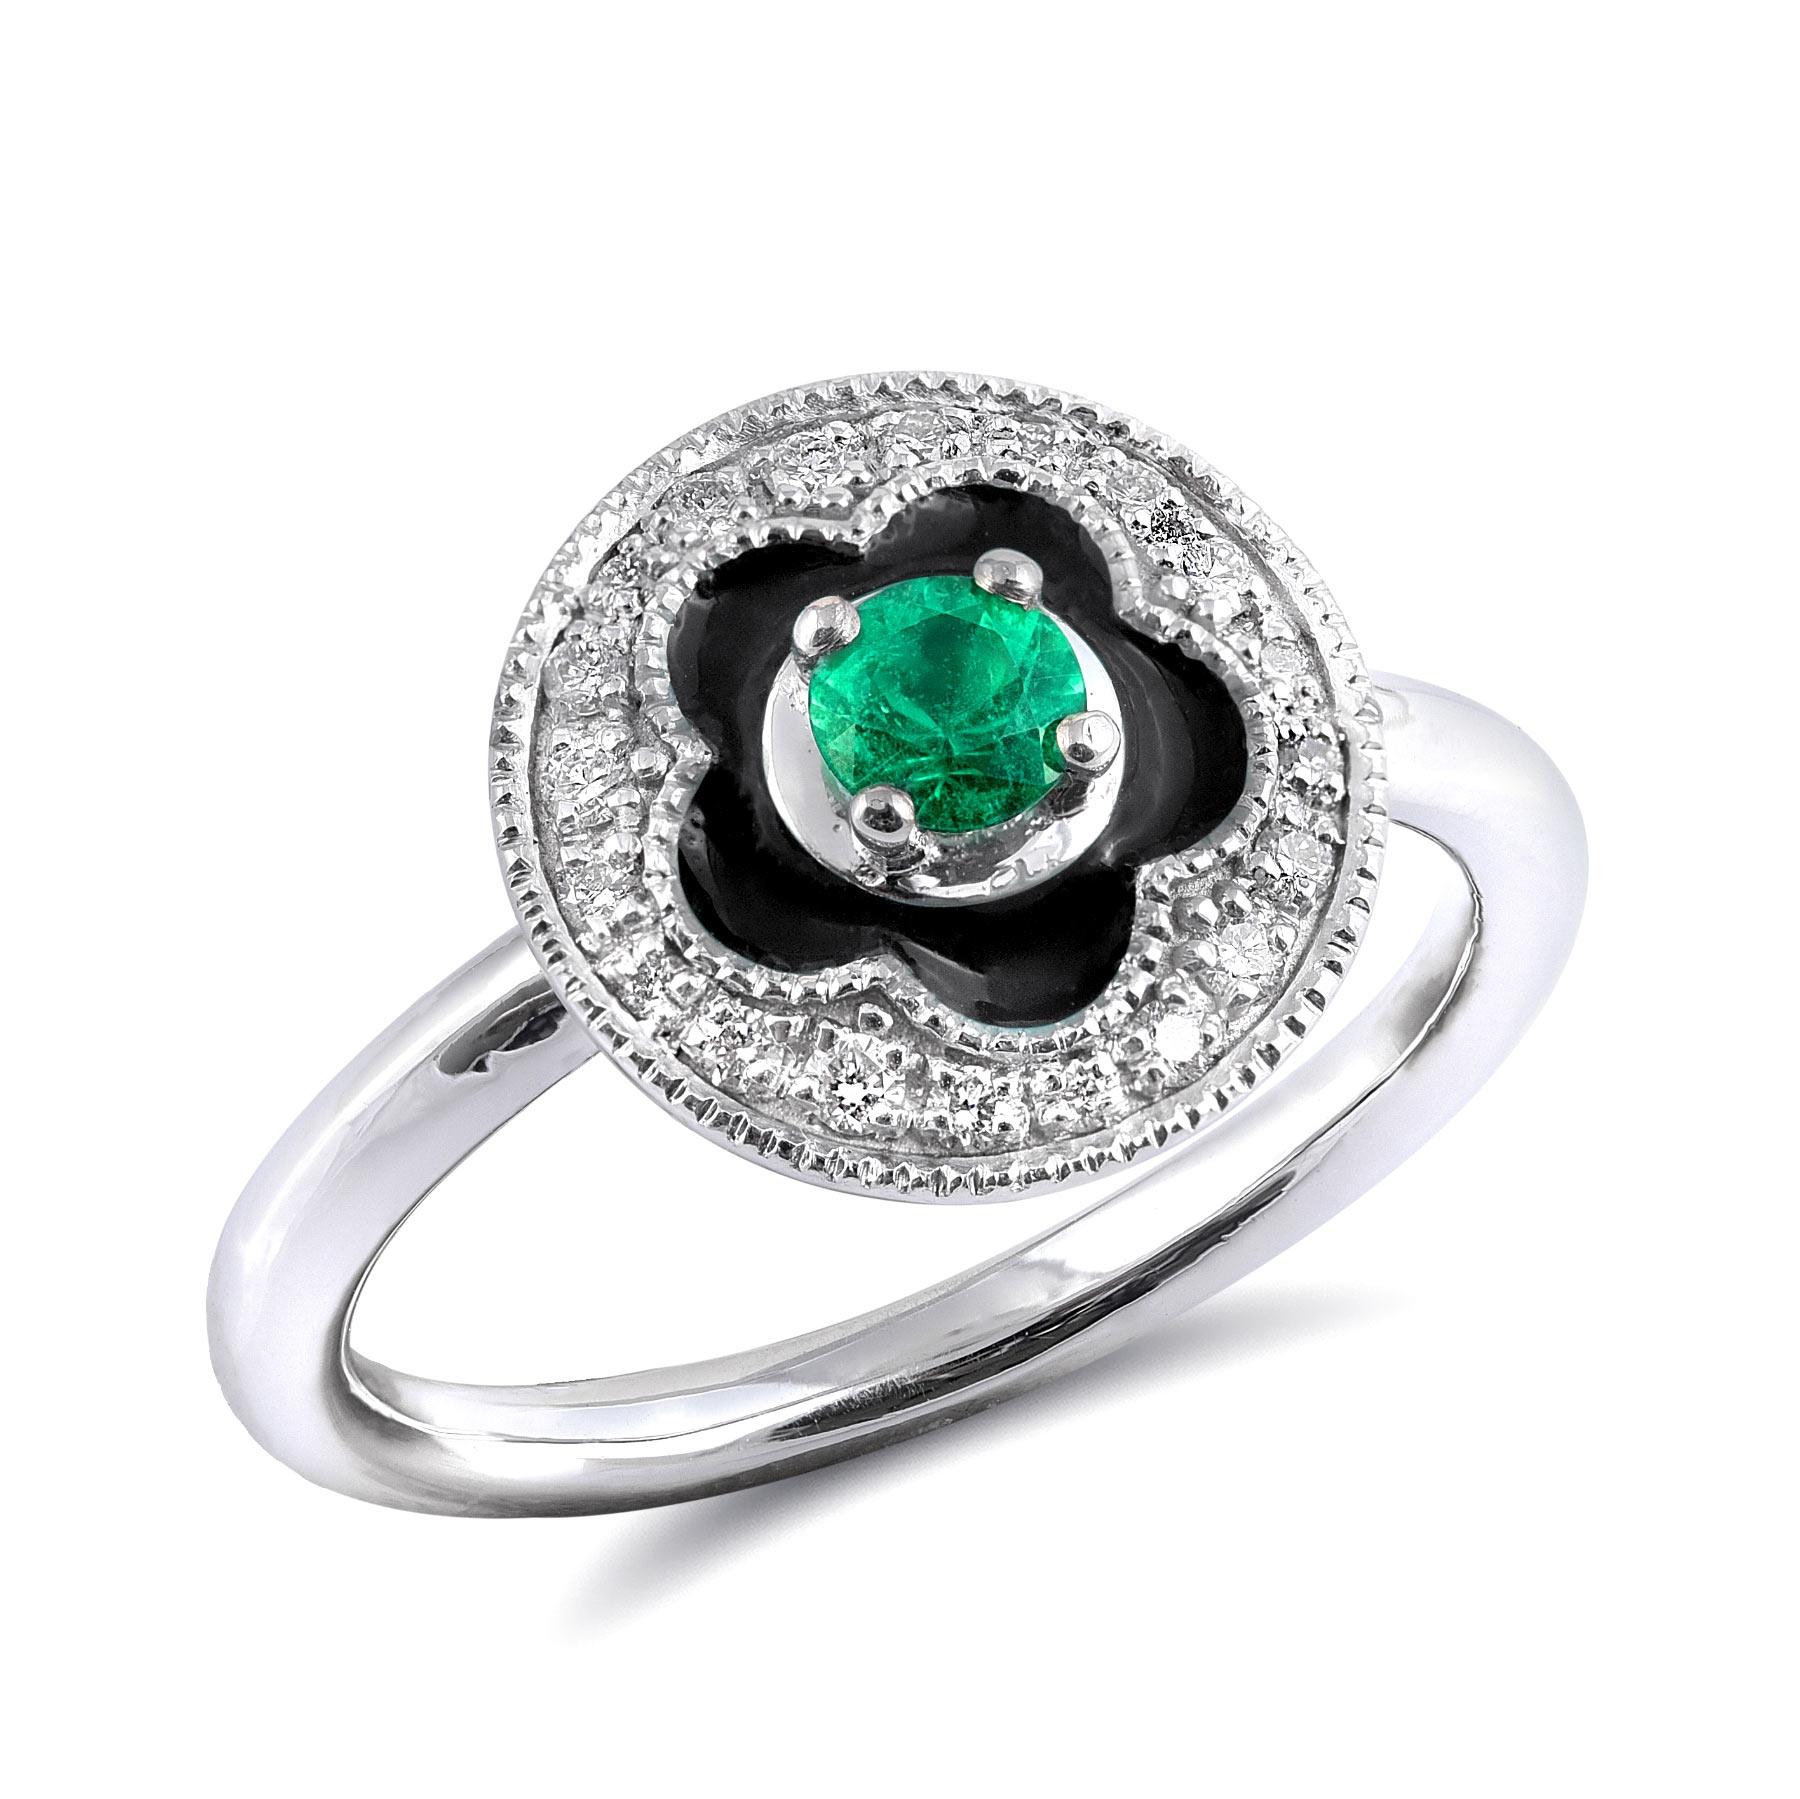 0.17 Carats Emerald Diamonds set with black enamel in 14K White Gold Ring In New Condition For Sale In Los Angeles, CA